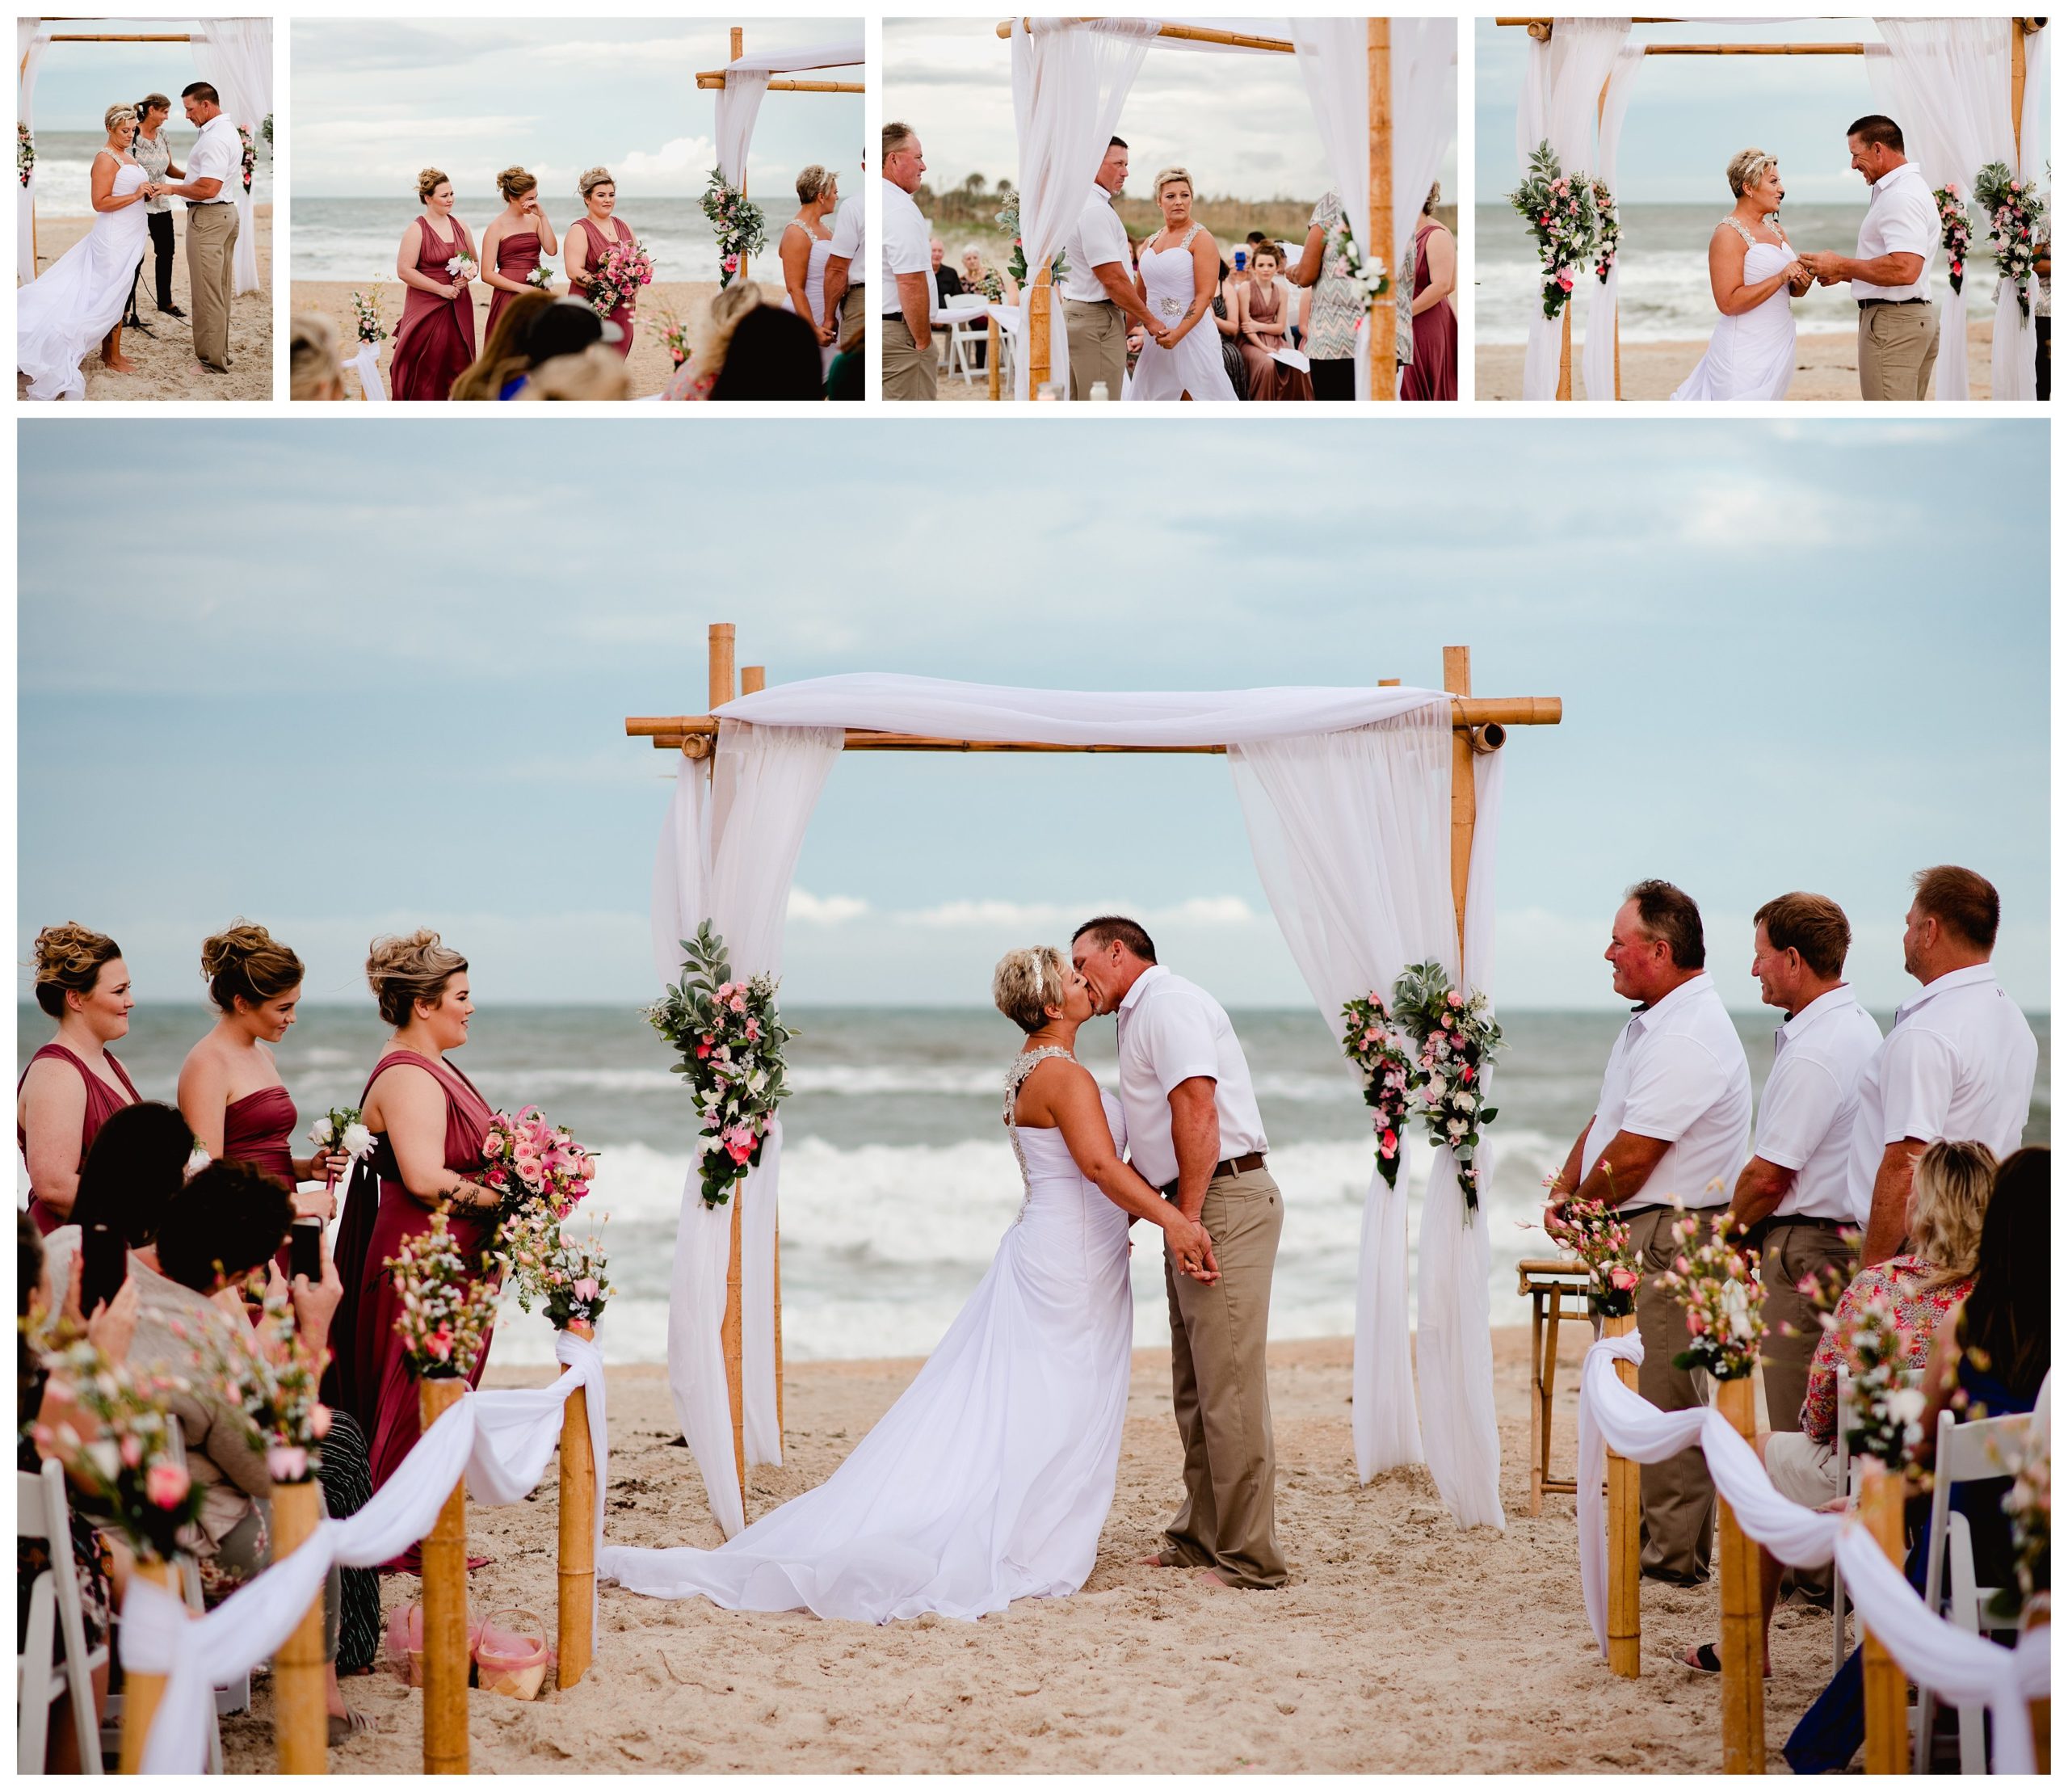 St. Augustine beach wedding captured in an intimate style by north florida wedding photographer.